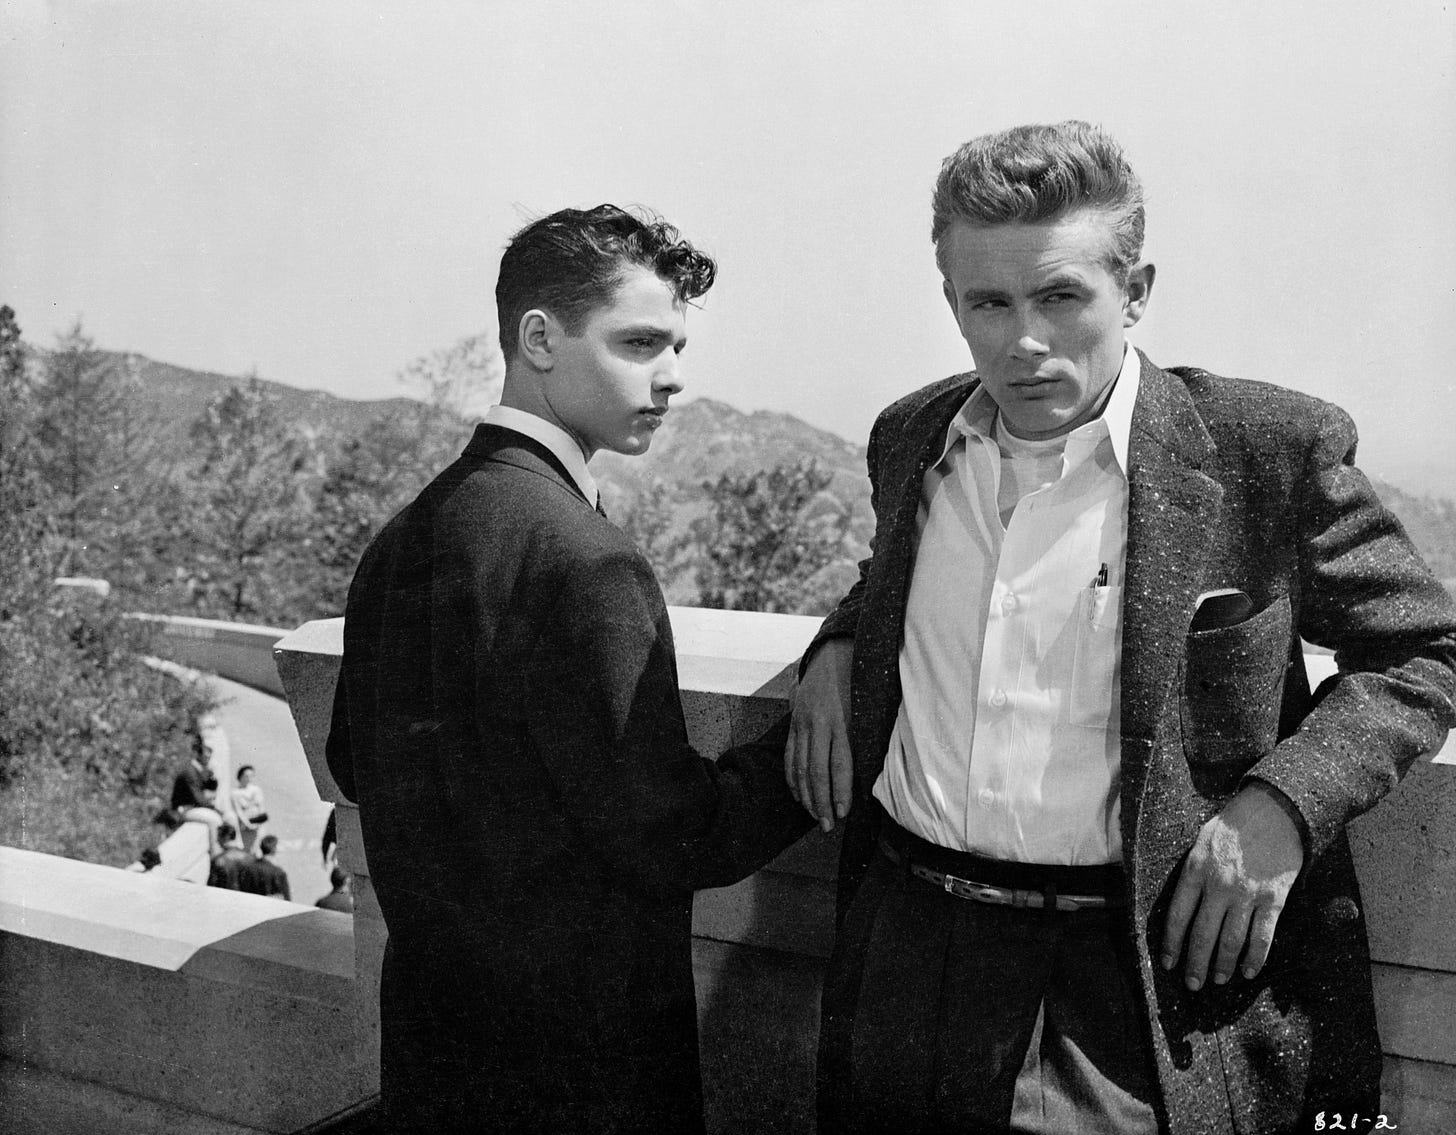 Sal Mineo and James Dean in Rebel Without a Cause (1955)